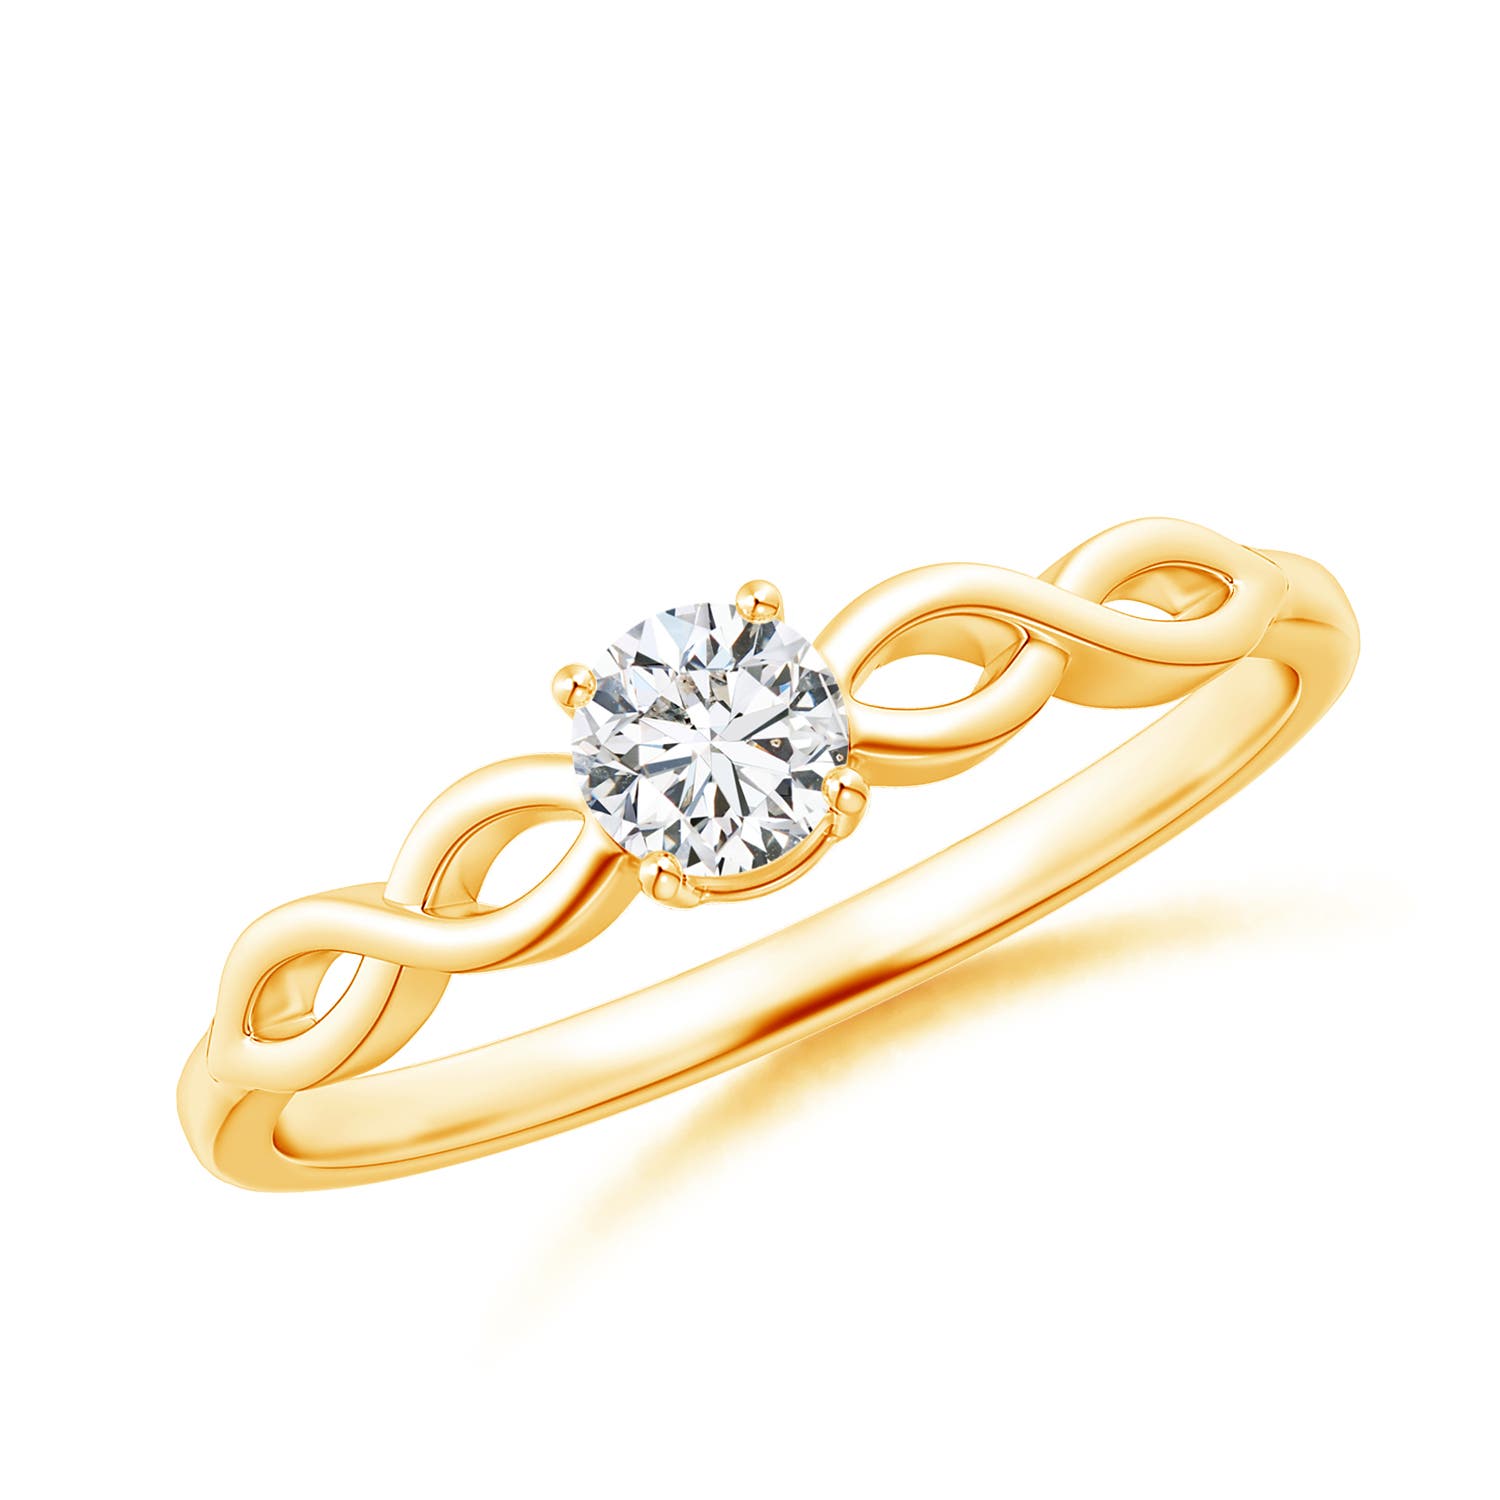 H, SI2 / 0.23 CT / 14 KT Yellow Gold